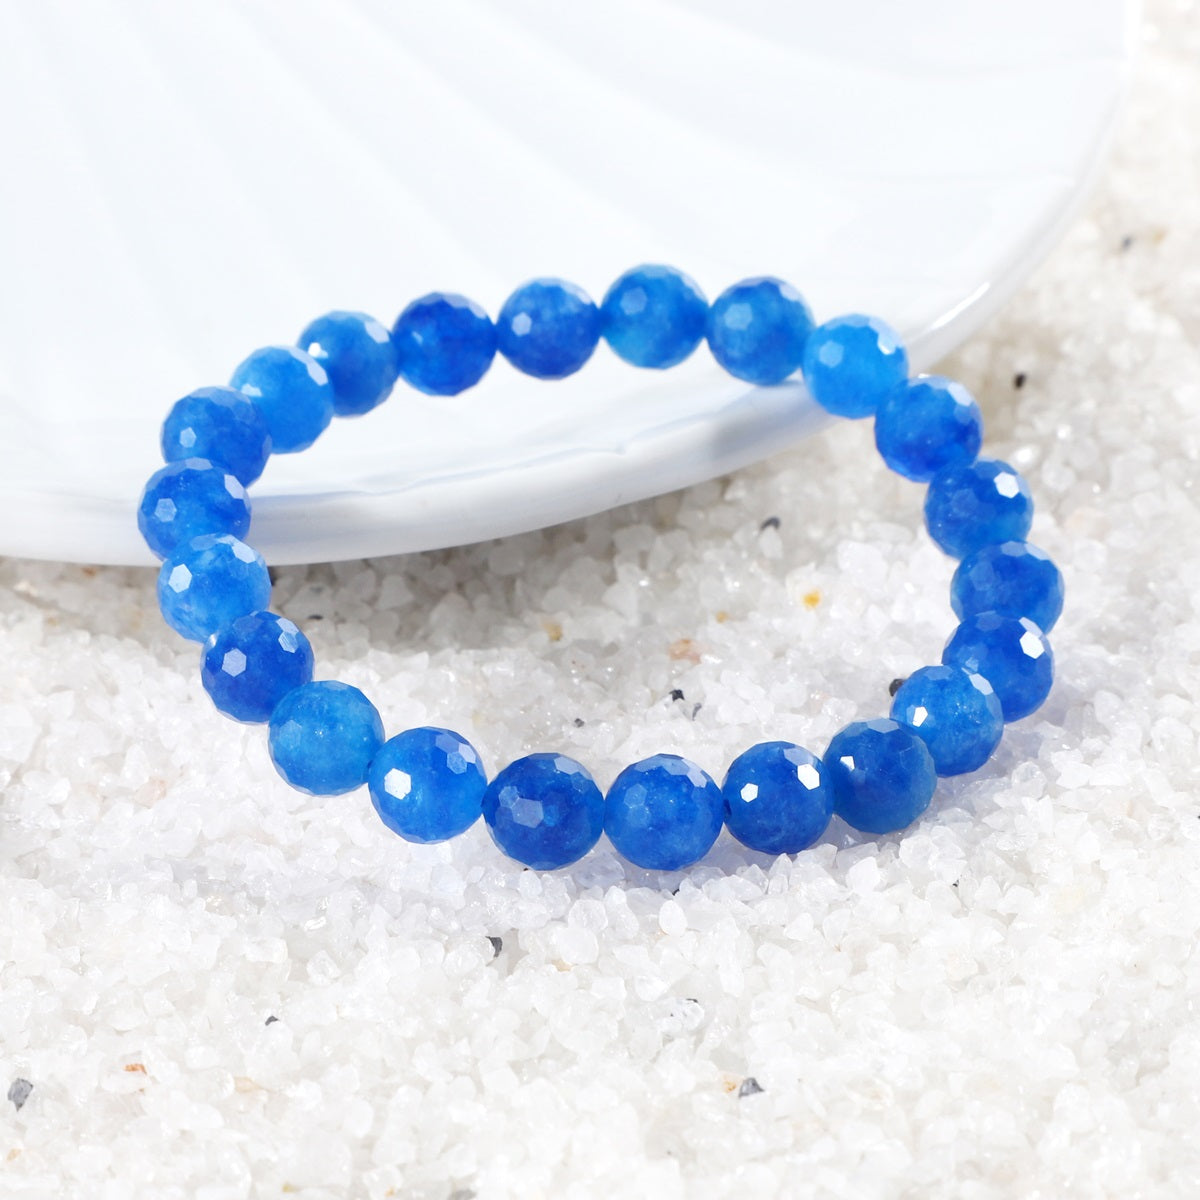 Faceted round Blue Quartz stones in the bracelet, reflecting light and adding a touch of sophistication